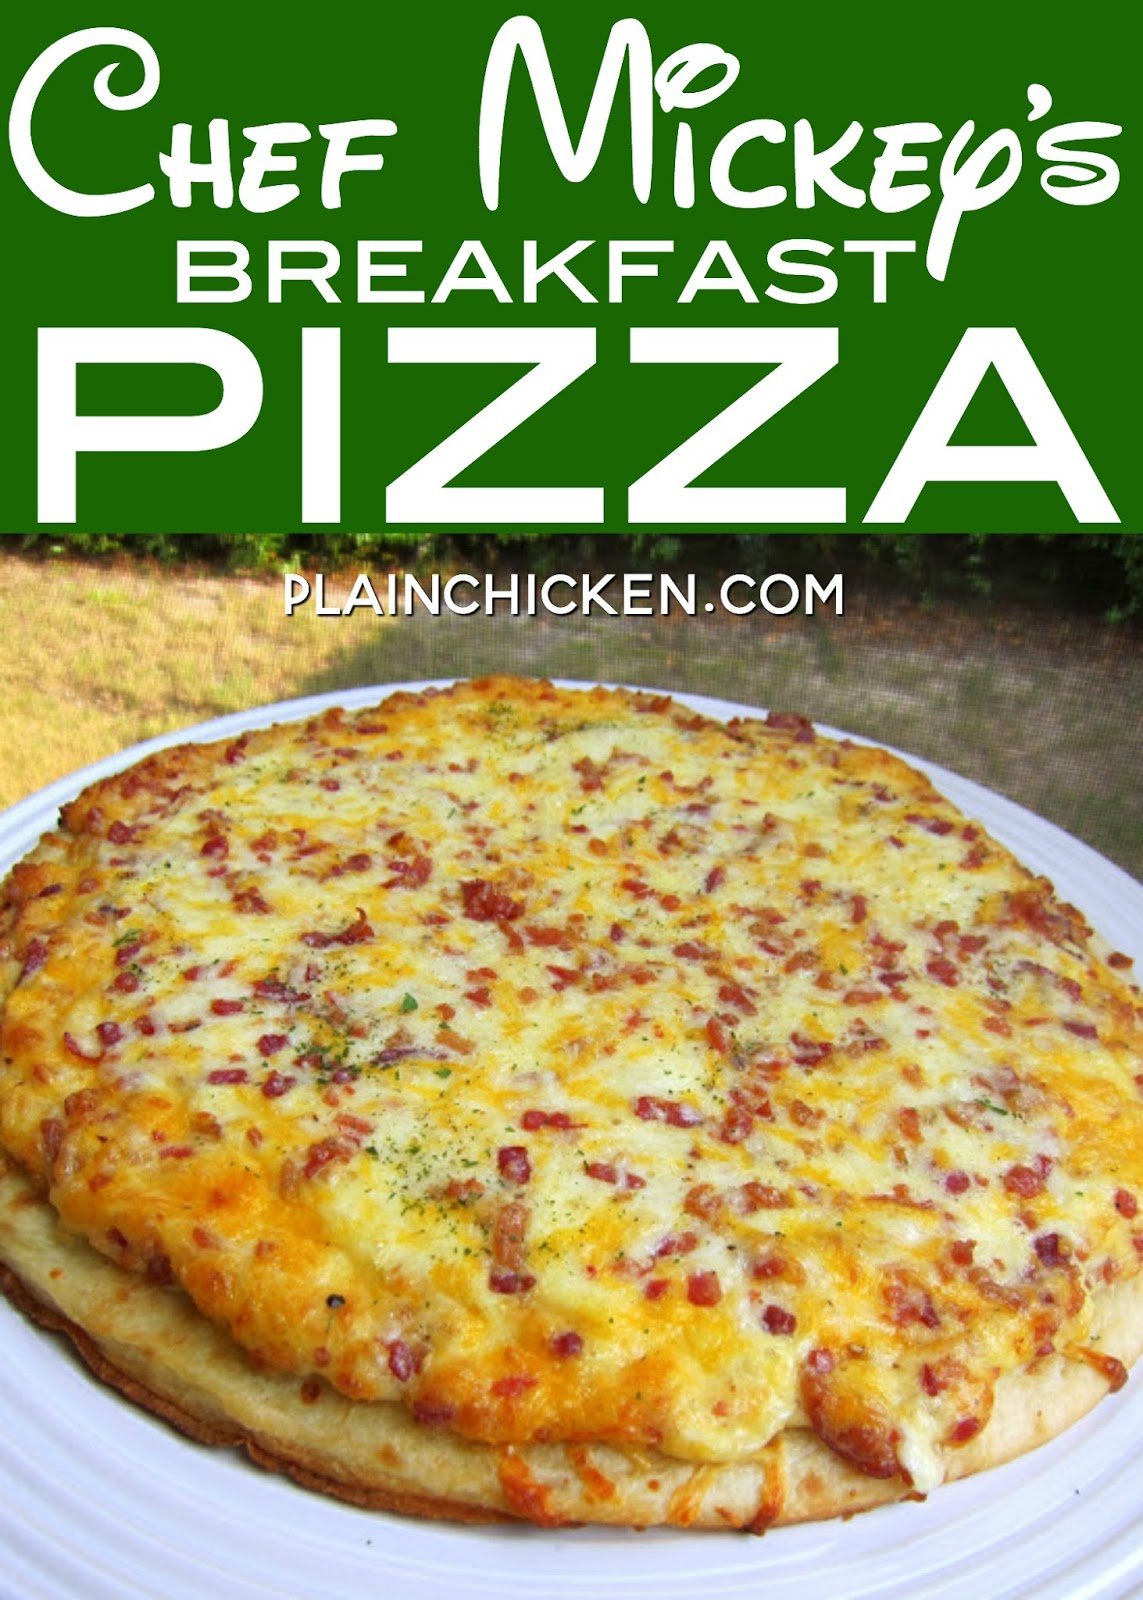 Chef Mickey's Breakfast Pizza - recipe from Walt Disney World - quick and easy breakfast pizza - ready in 10 minutes!! Premade pizza crust topped with eggs, heavy cream, mozzarella, provolone, cheddar and bacon. Great weekday breakfast! #disney #kidfriendly #breakfast